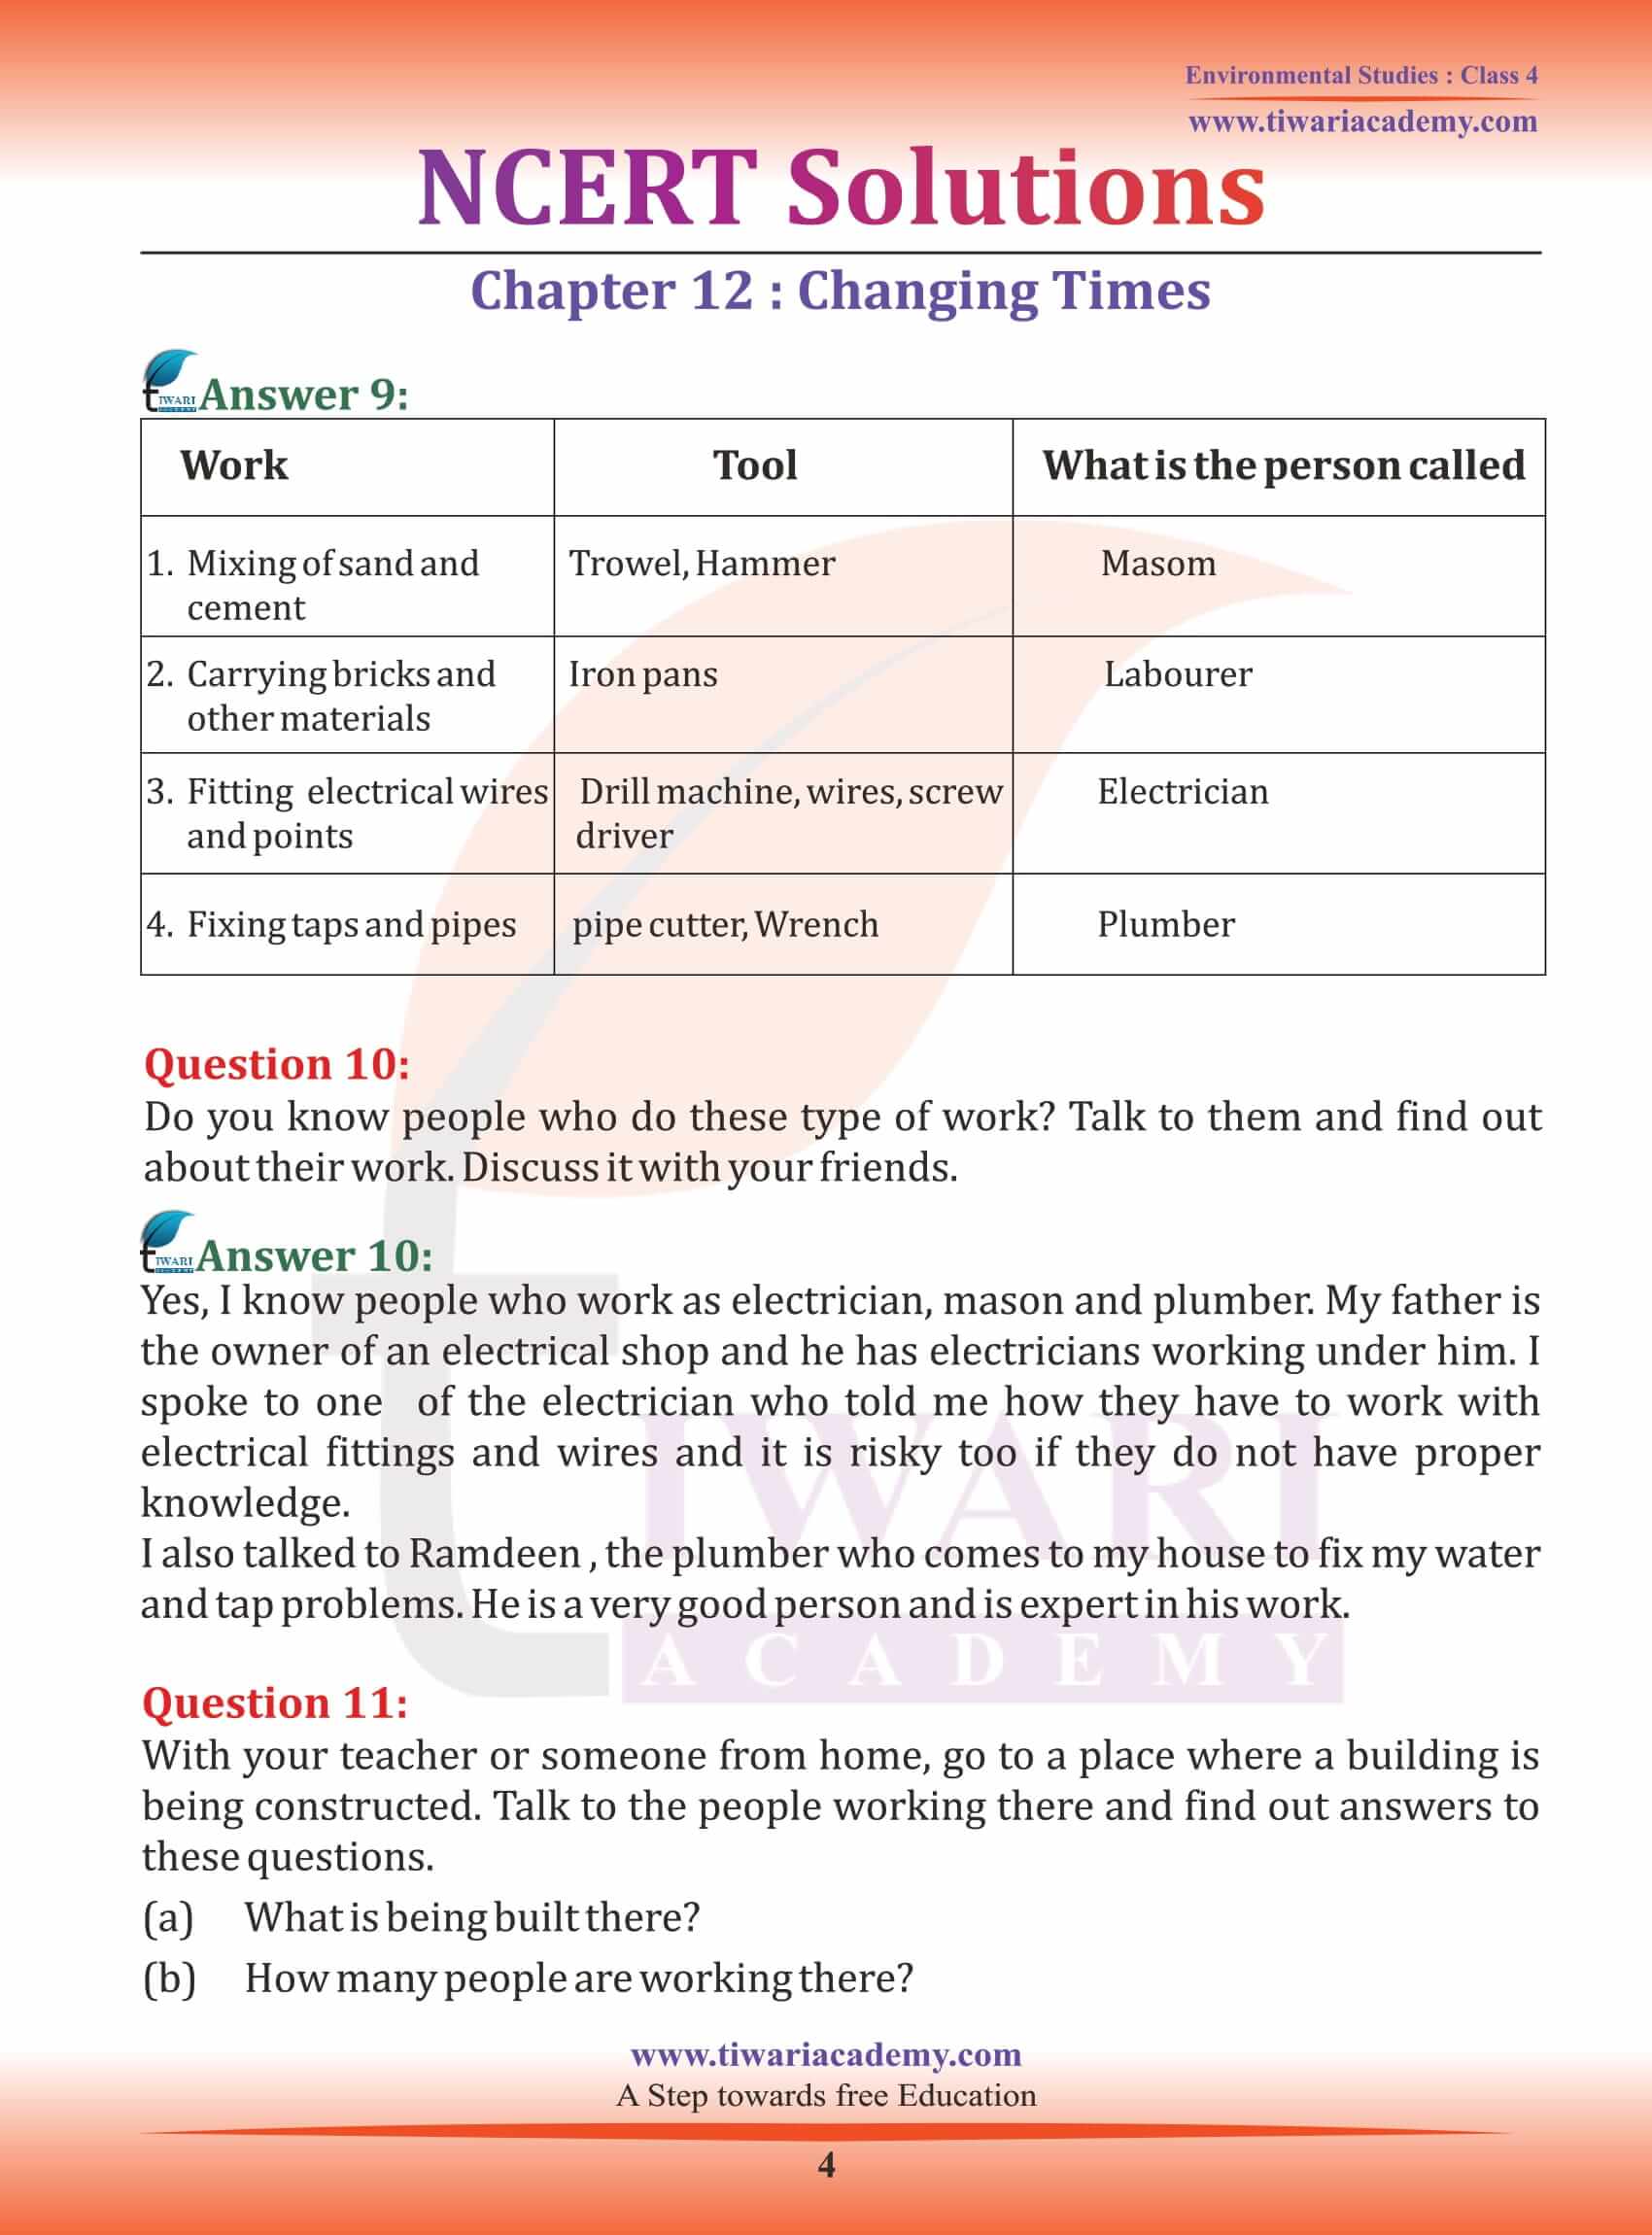 NCERT Solutions for Class 4 EVS Chapter 12 in English Medium